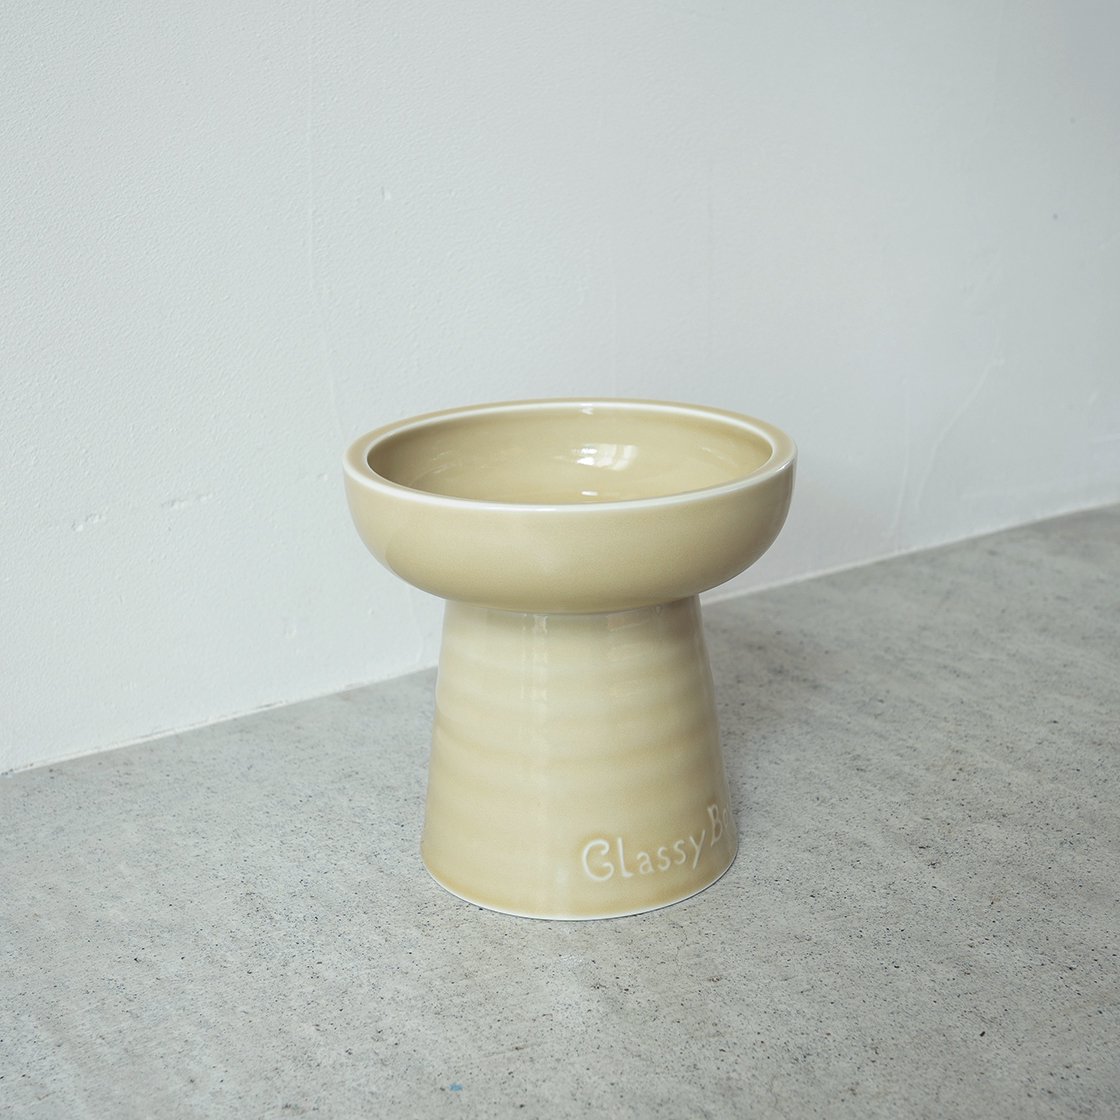 Classy Bowl5ۥ饷 Made in Japan